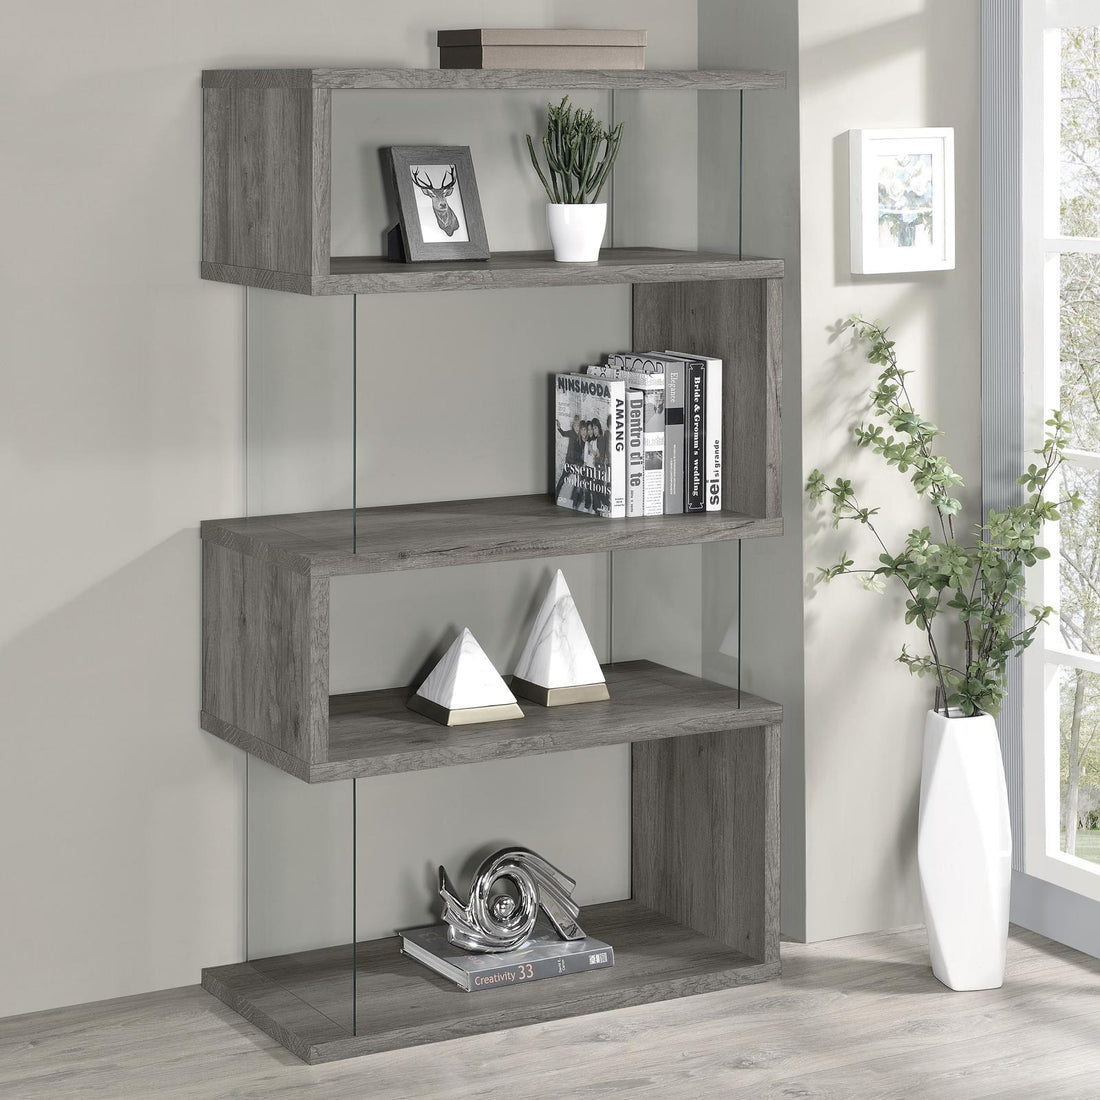 Emelle 4-Shelf Bookcase with Glass Panels - 802340 - Bien Home Furniture &amp; Electronics